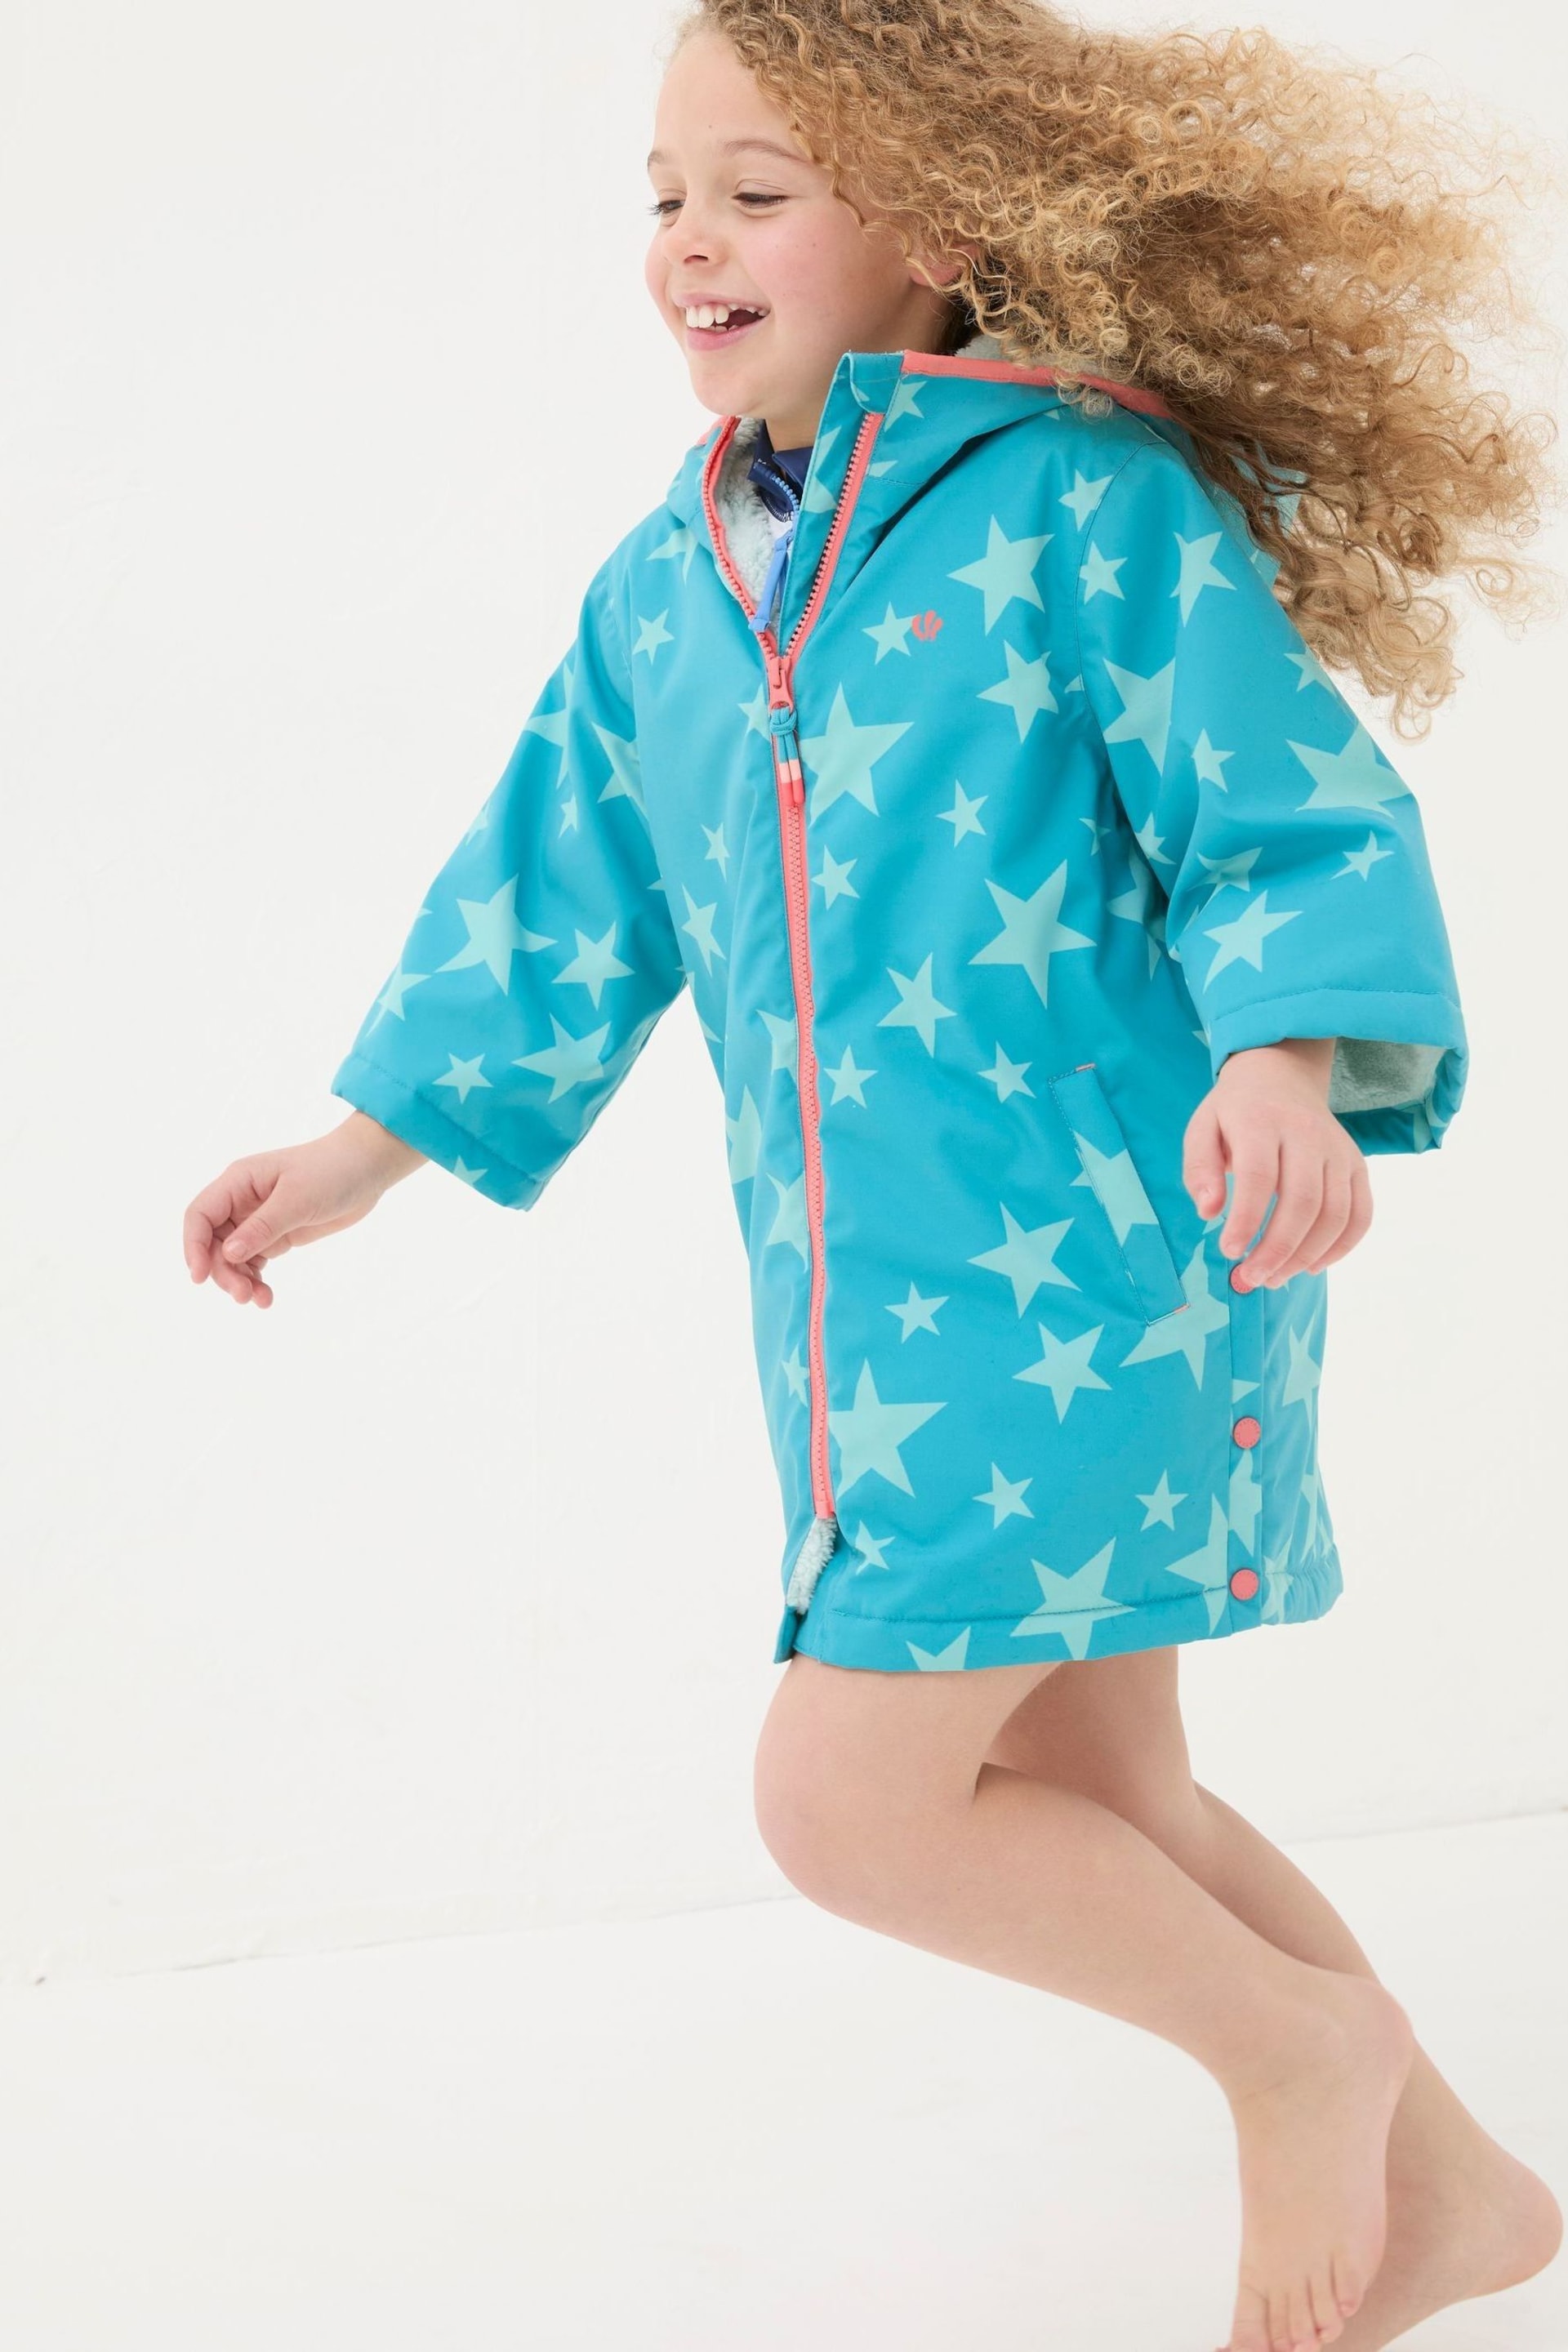 FatFace Blue Waterproof Changing Robe - Image 1 of 6